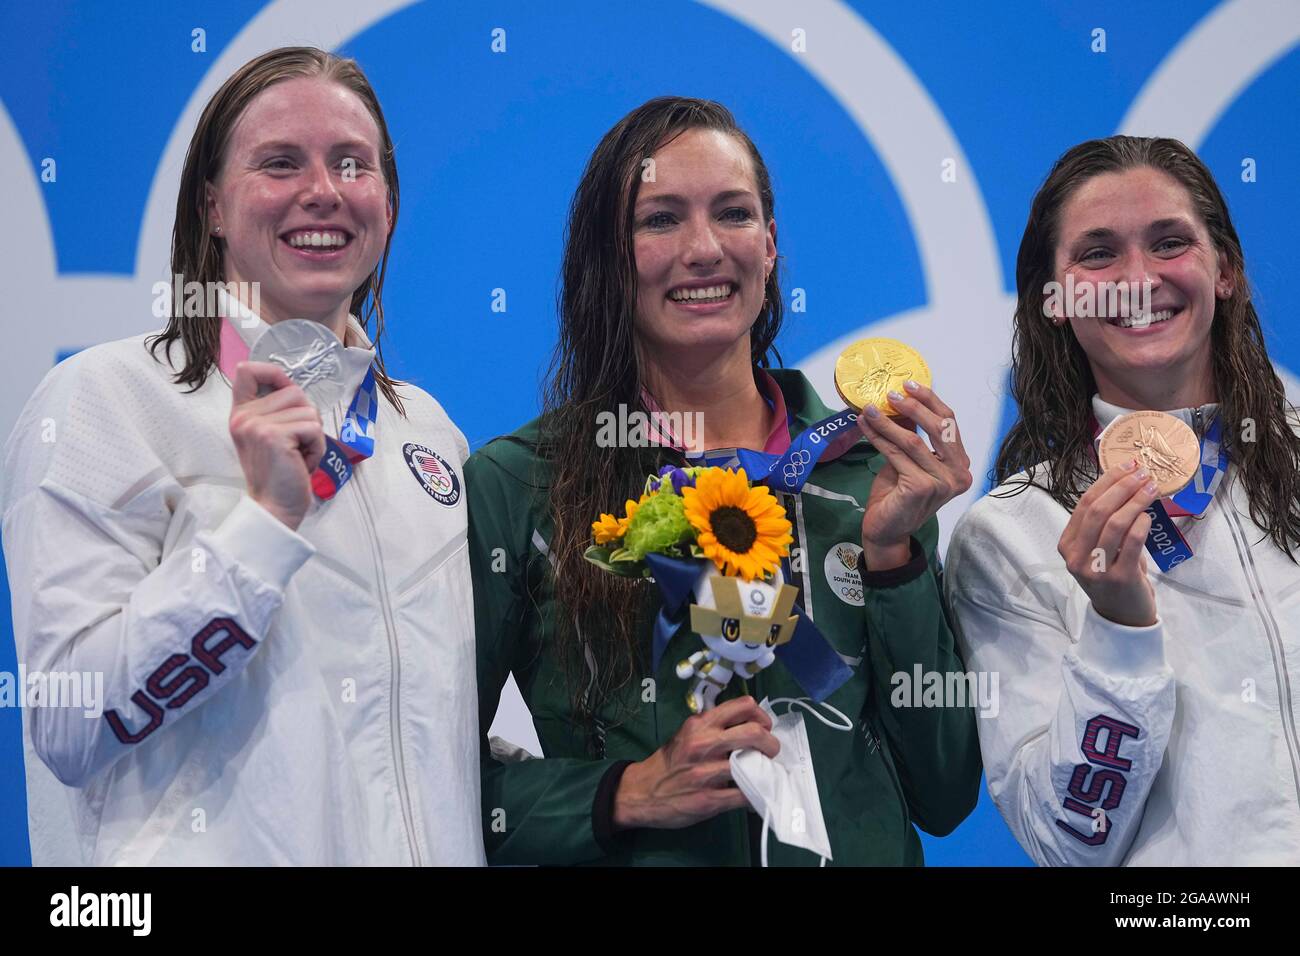 Tokyo, Japan. 30th July, 2021. Gold medalist Tatjana Schoenmaker (C) of South Africa, silver medalist Lilly King (L) and bronze medalist Annie Lazor of the United States pose for photos during the awarding ceremony for the women's 200m breaststroke final of swimming at the Tokyo 2020 Olympic Games in Tokyo, Japan, July 30, 2021. Credit: Xu Chang/Xinhua/Alamy Live News Stock Photo